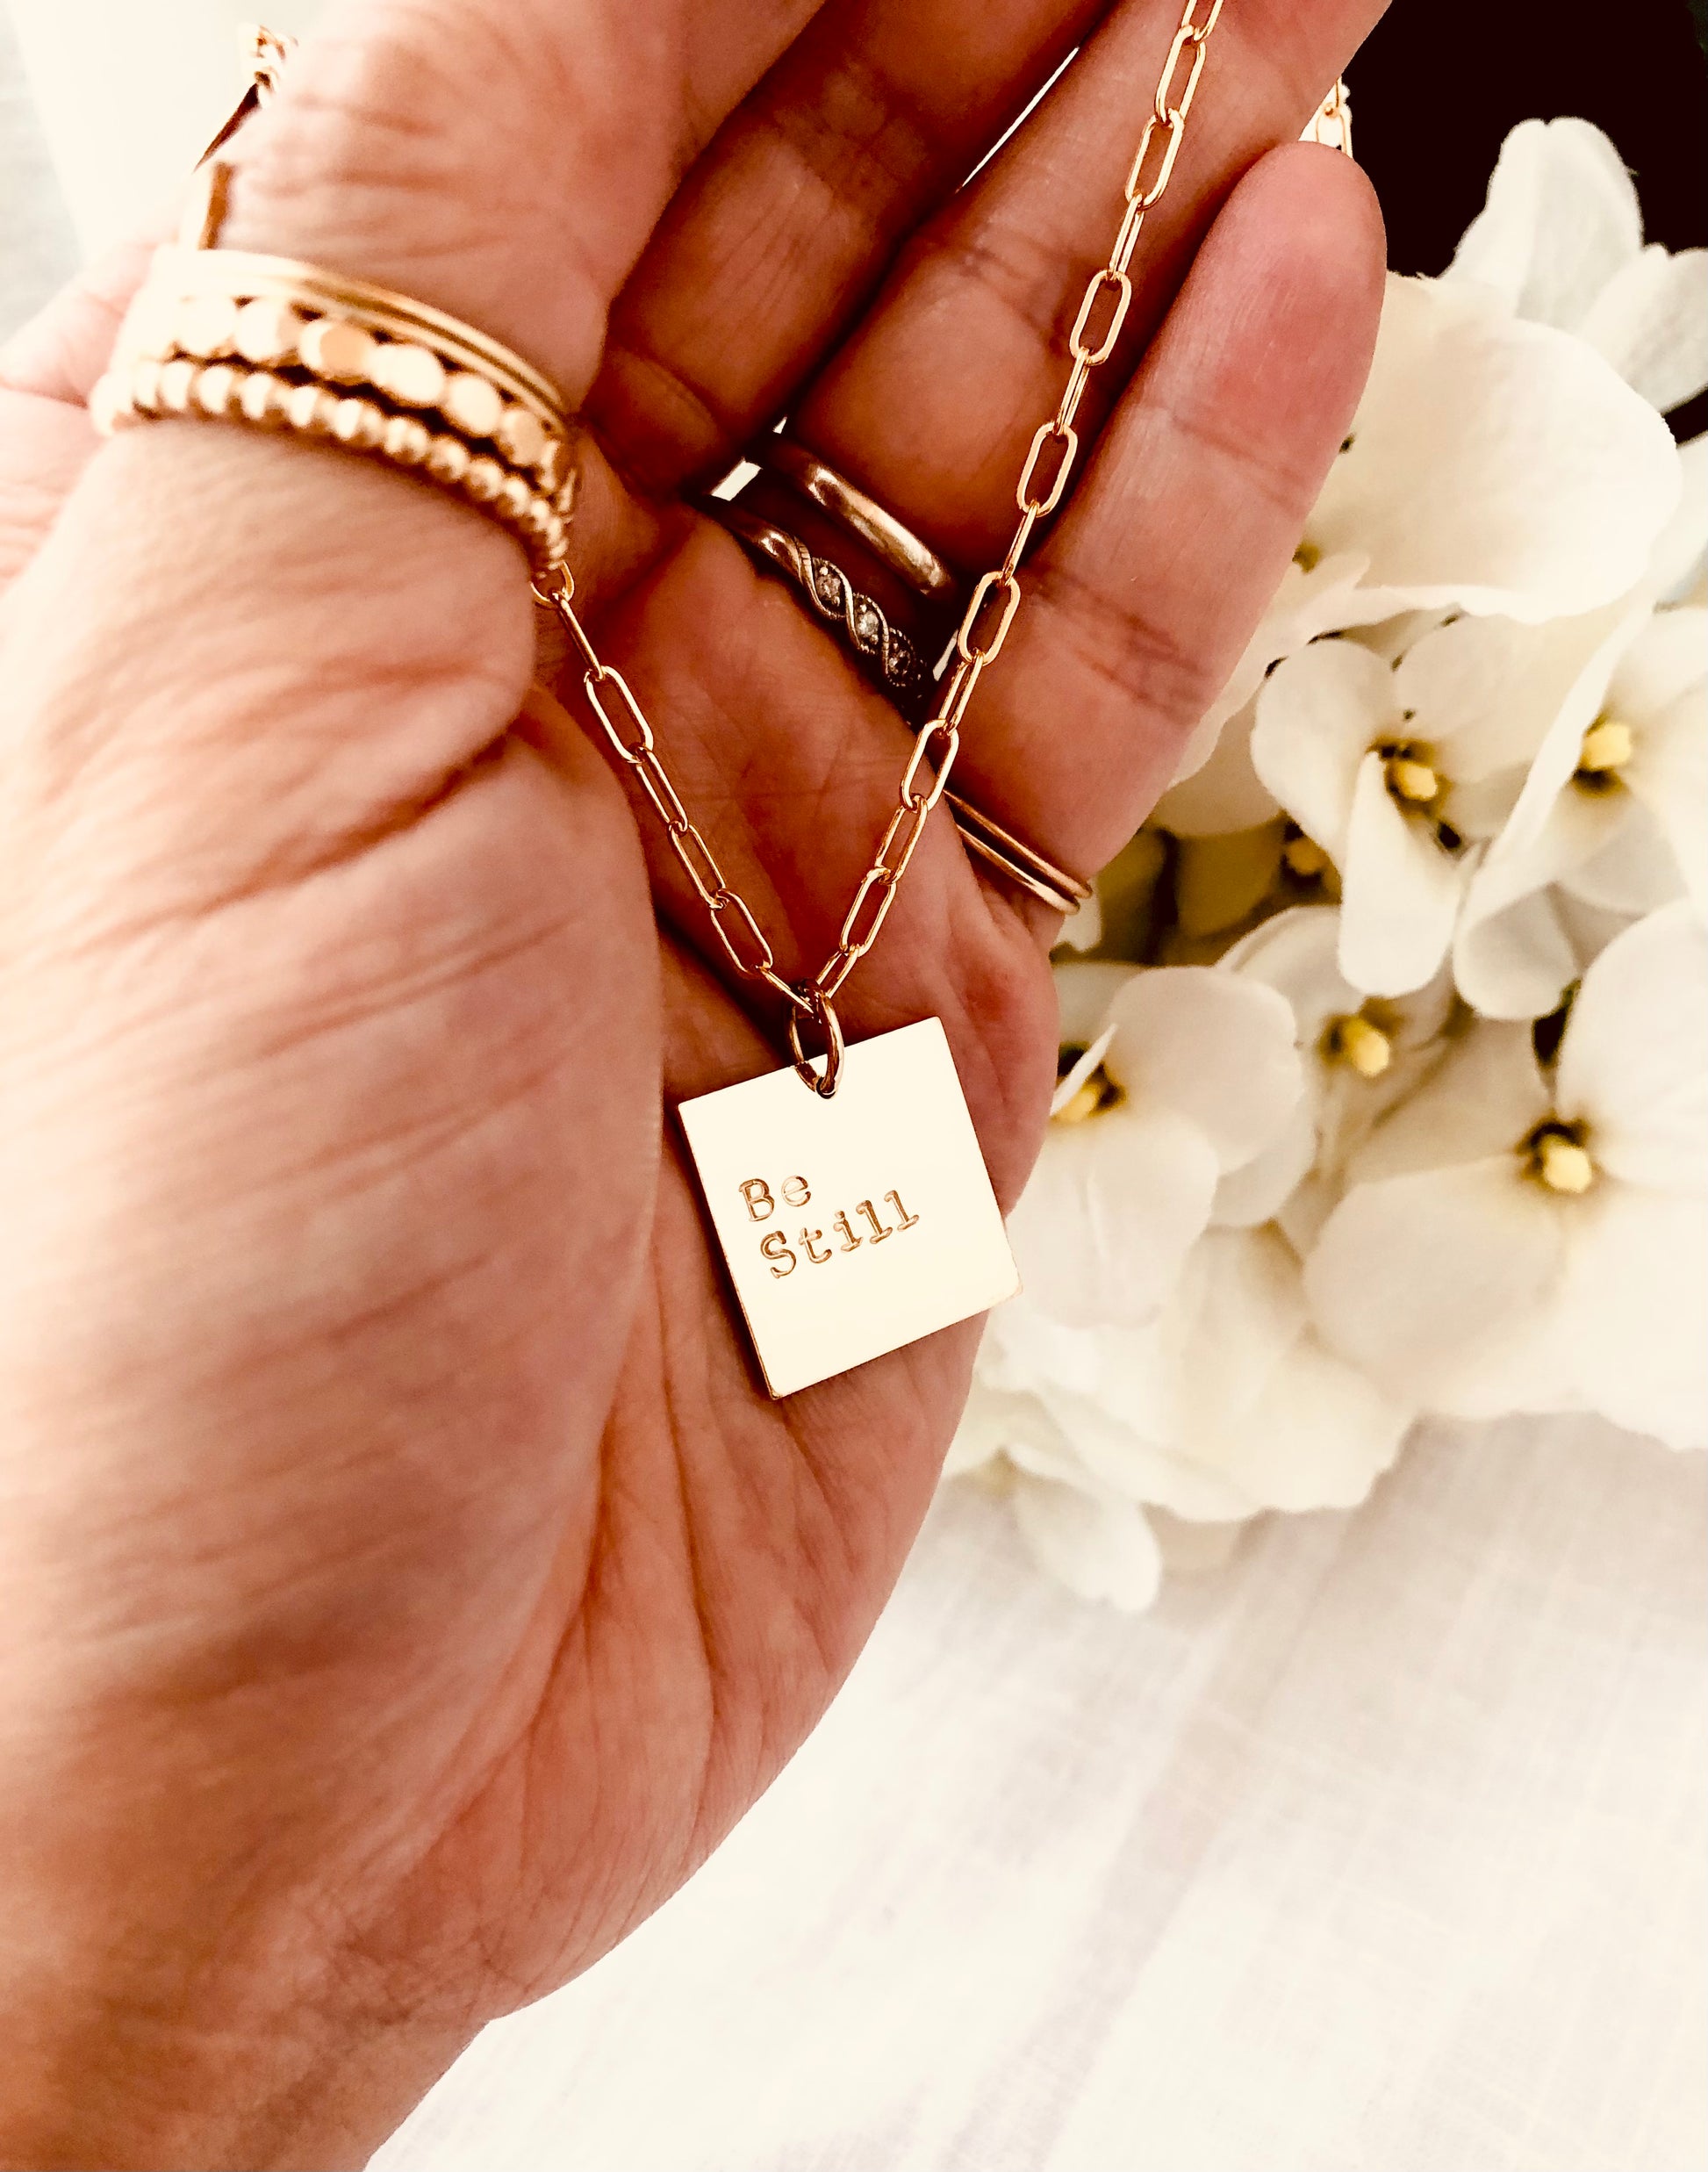 Square Plate Necklace, Personalized Necklace, Long Necklace, Hand Stamped Jewelry, Statement Necklace, Monogram and Name Jewelry, Office Outfit, Delicate Jewelry, Mothers Gift, Coco Wagner Jewelry, Gift For Her, Gift Ideas,  Birthday Gift, Mothers Gift, Christmas Gift Ideas, Mothers Day Gift  Minimalist Jewelry, Everyday Jewelry, Simple and Dainty